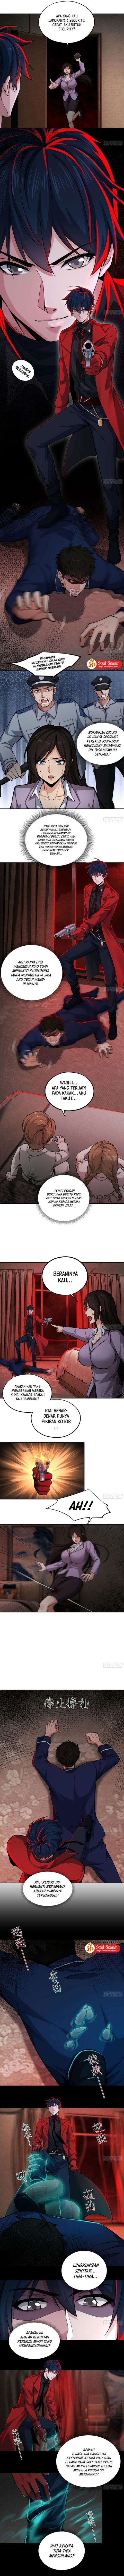 Since The Red Moon Appeared (Hongyue Start) Chapter 89 - 69